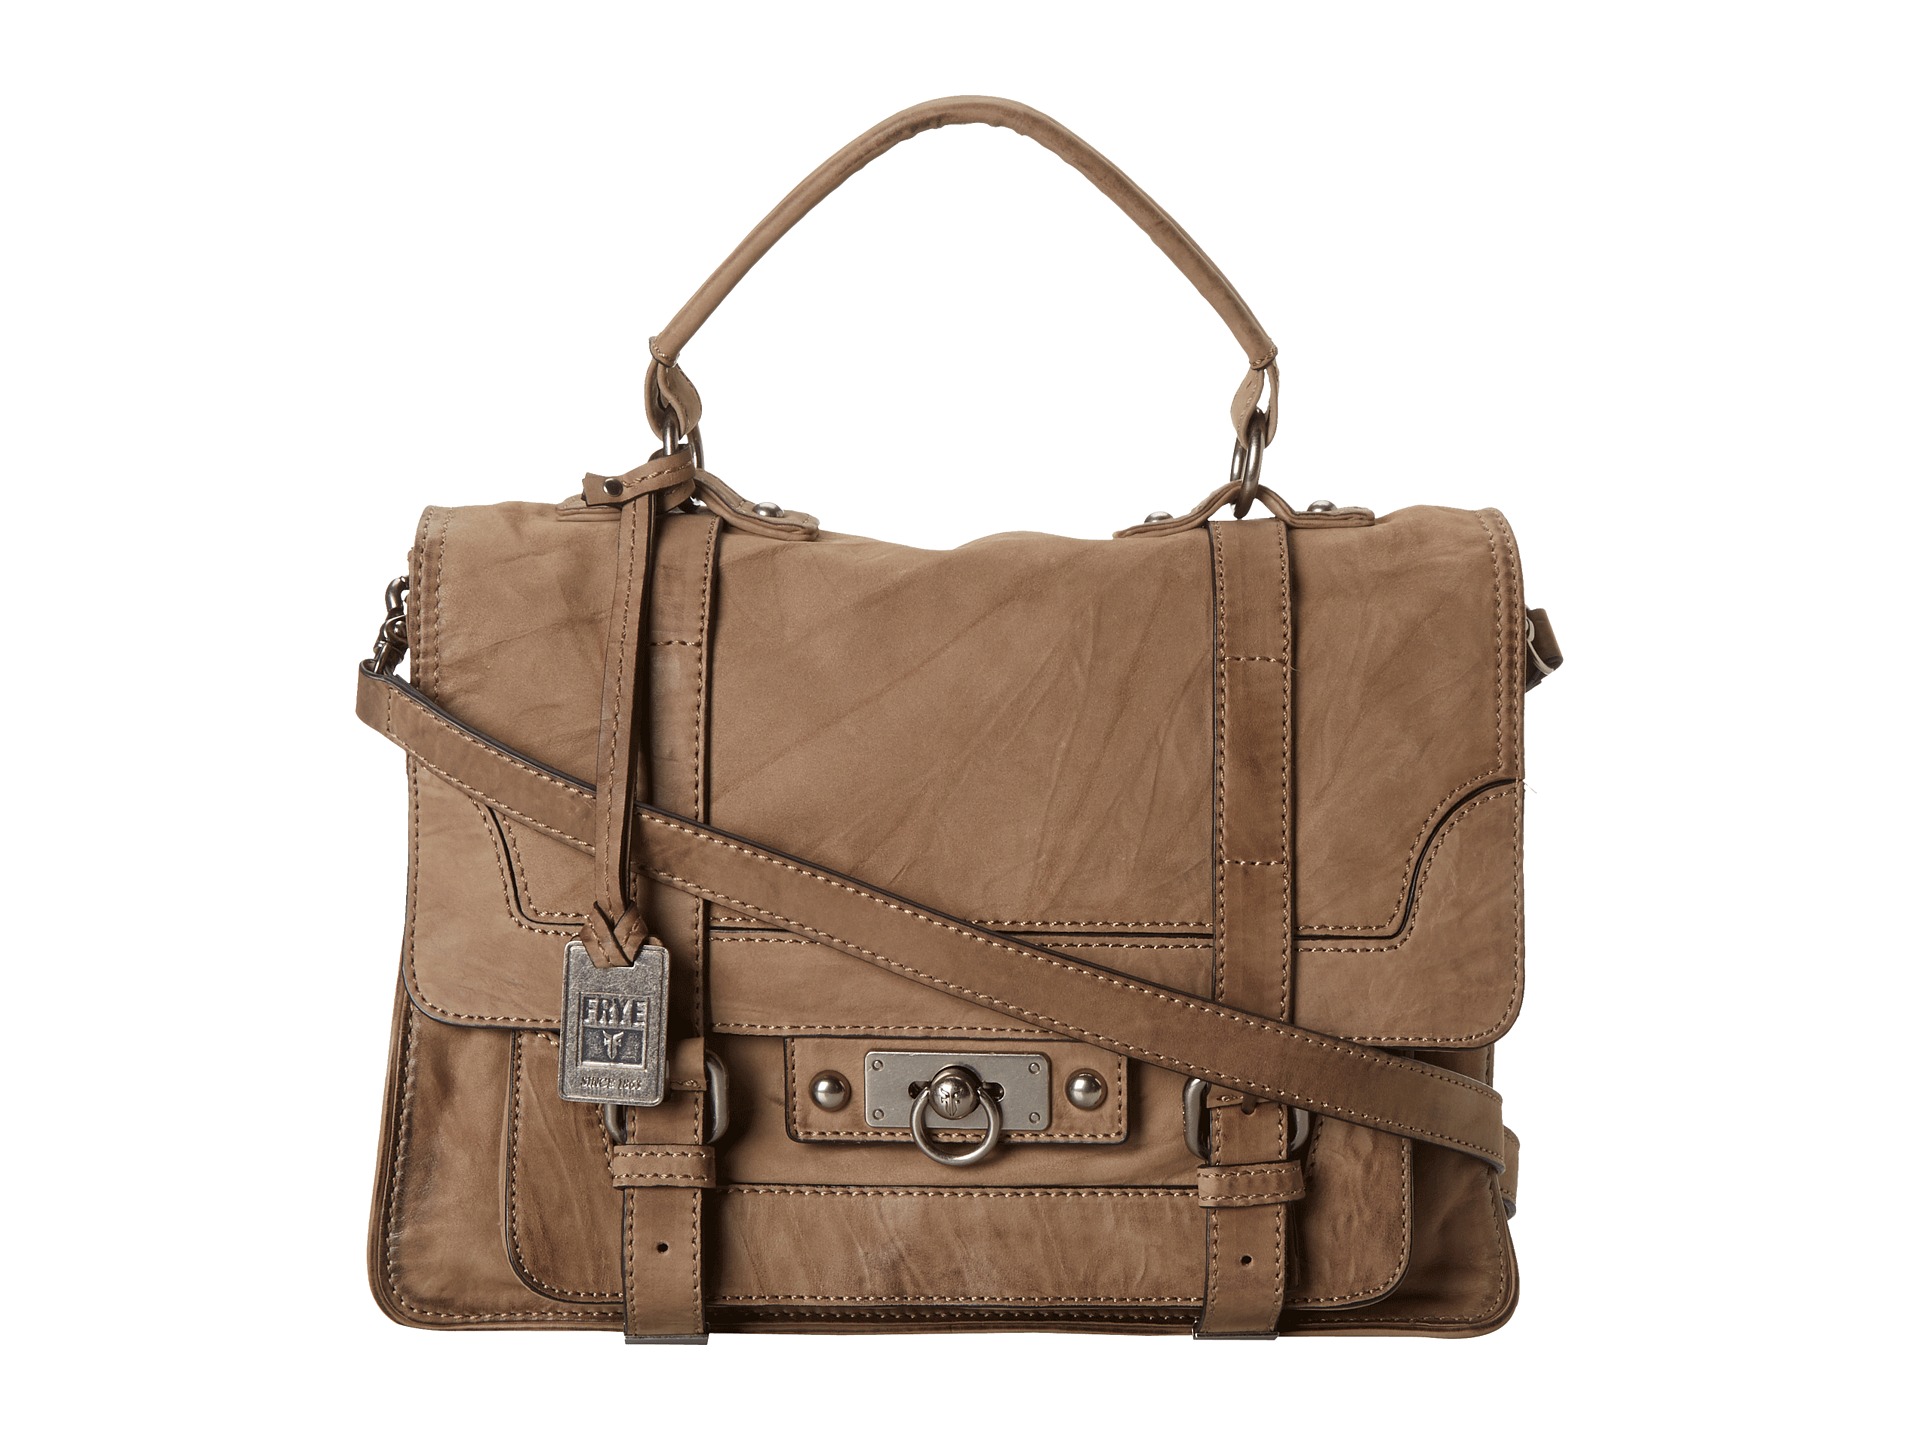 No results for frye cameron satchel - Search 0